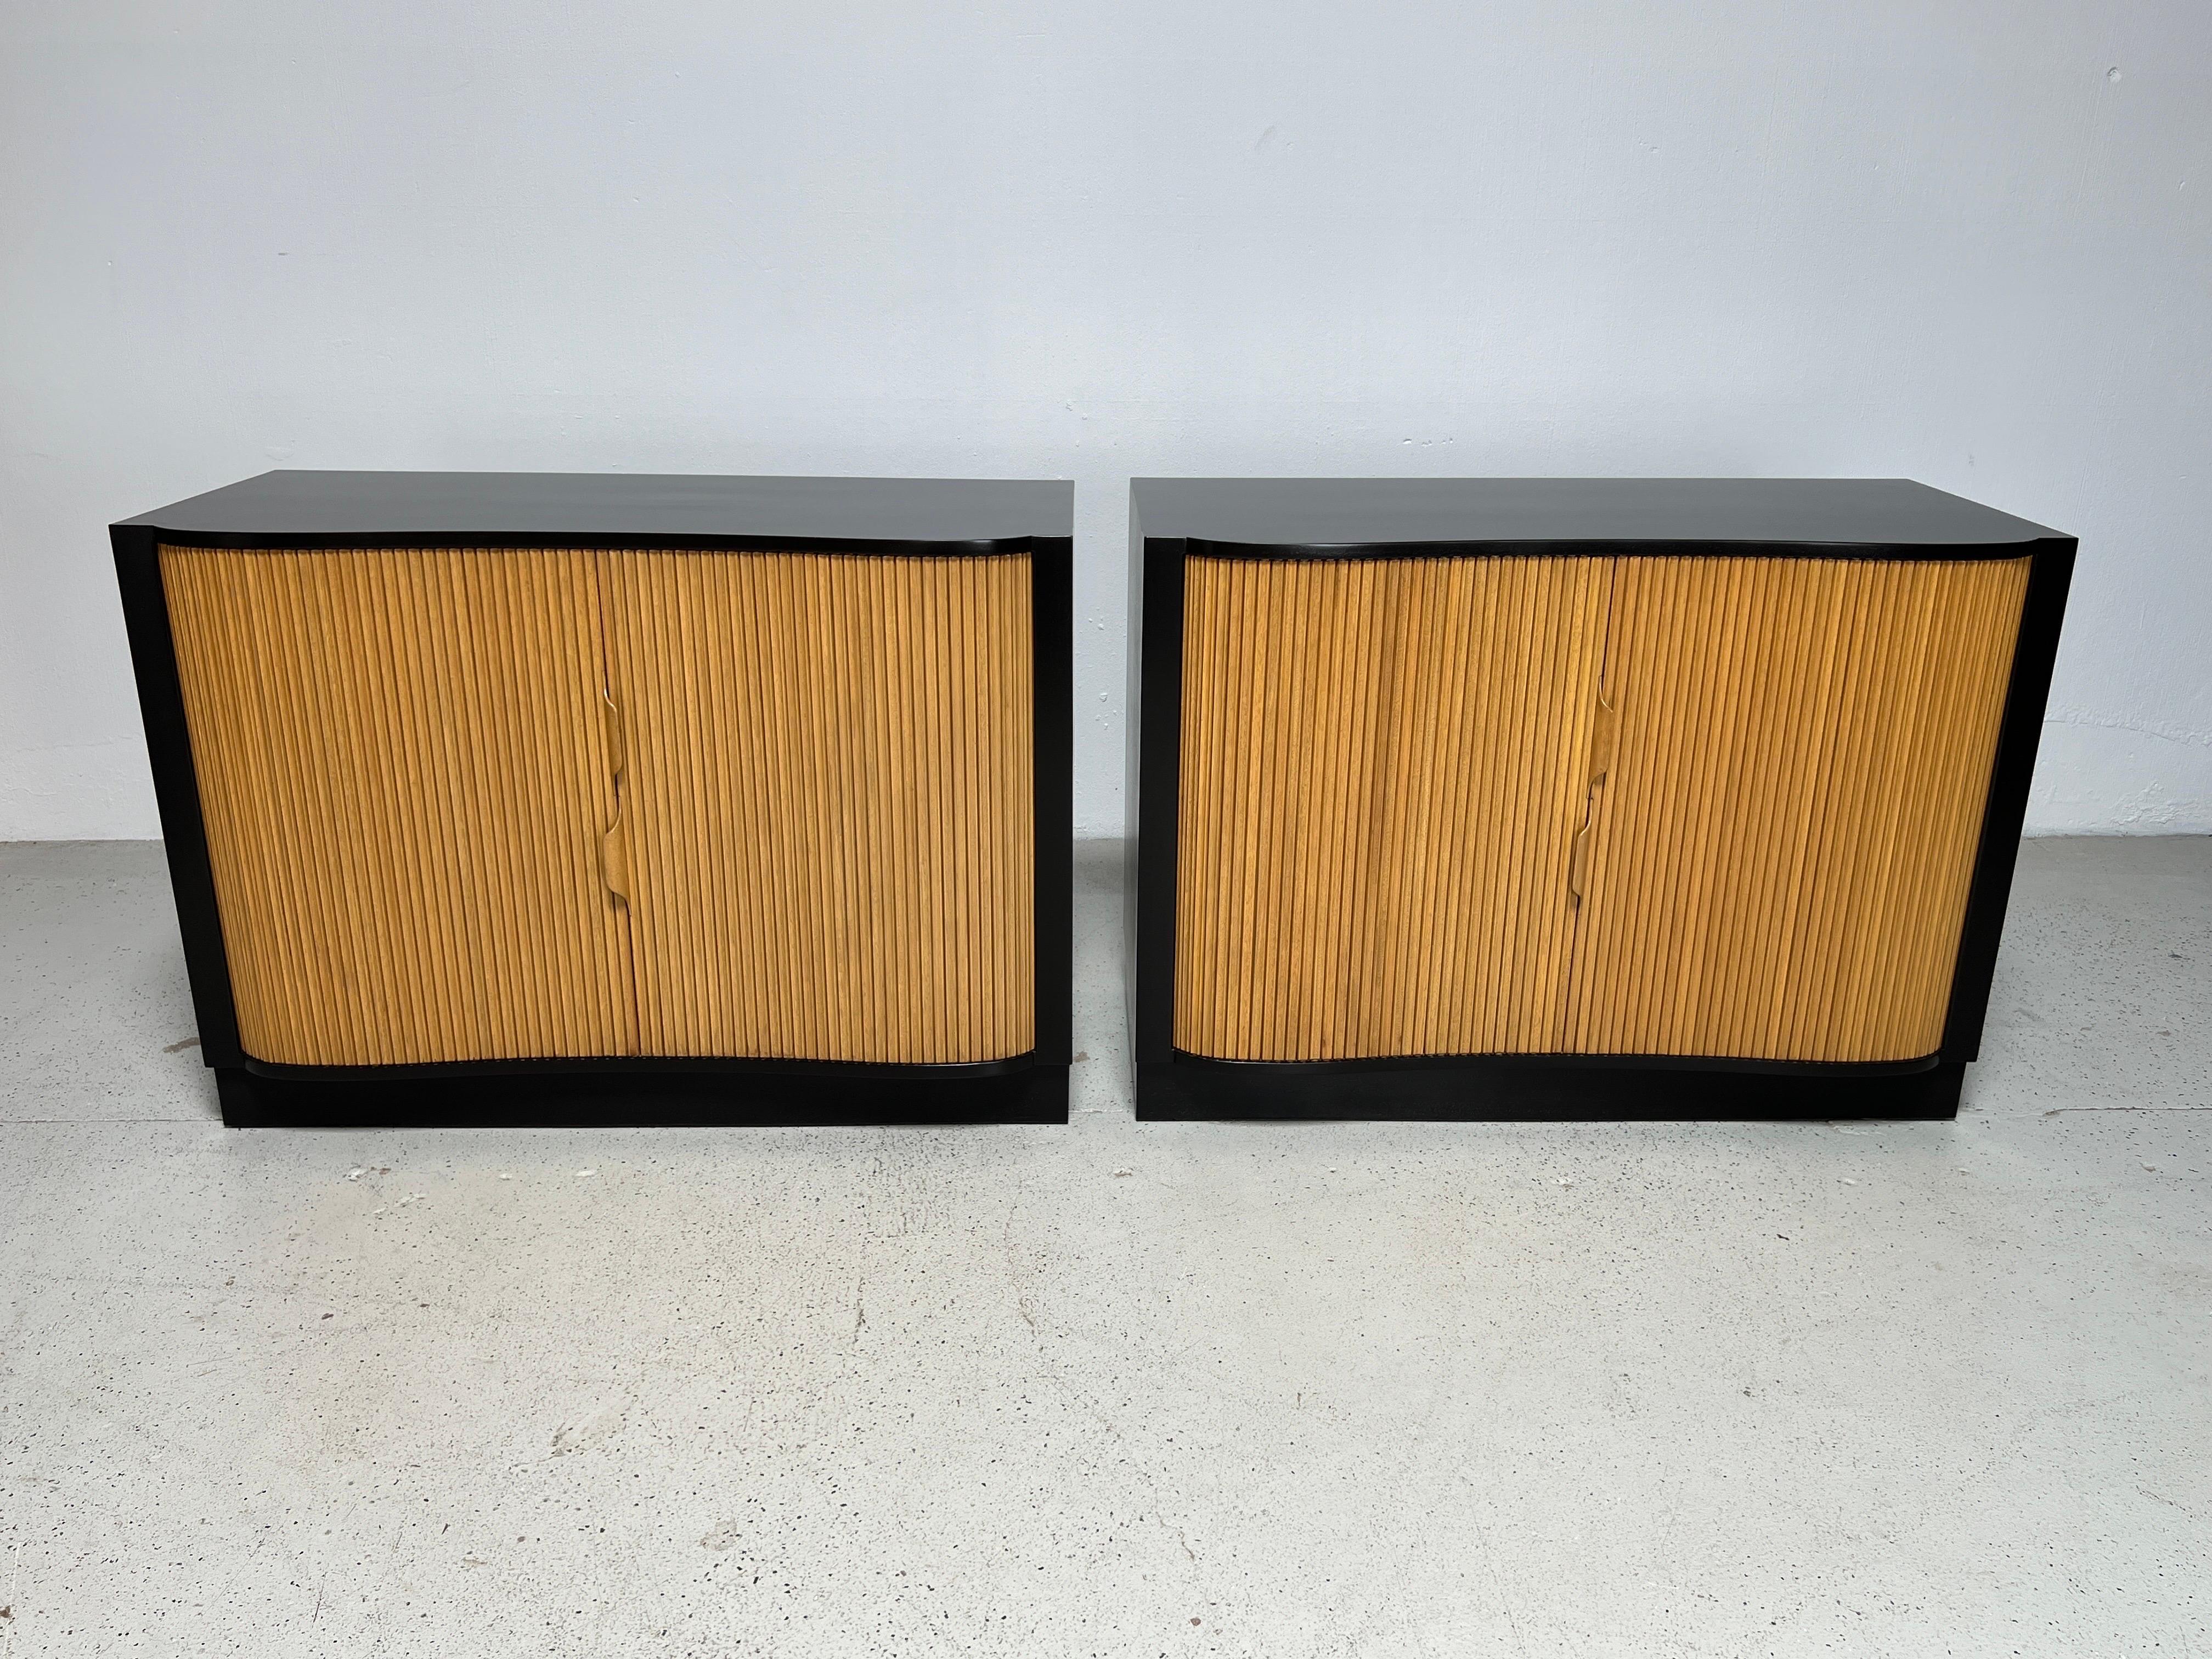 A pair of two toned tambour door serpentine cabinets designed by Edward Wormley for Dunbar.